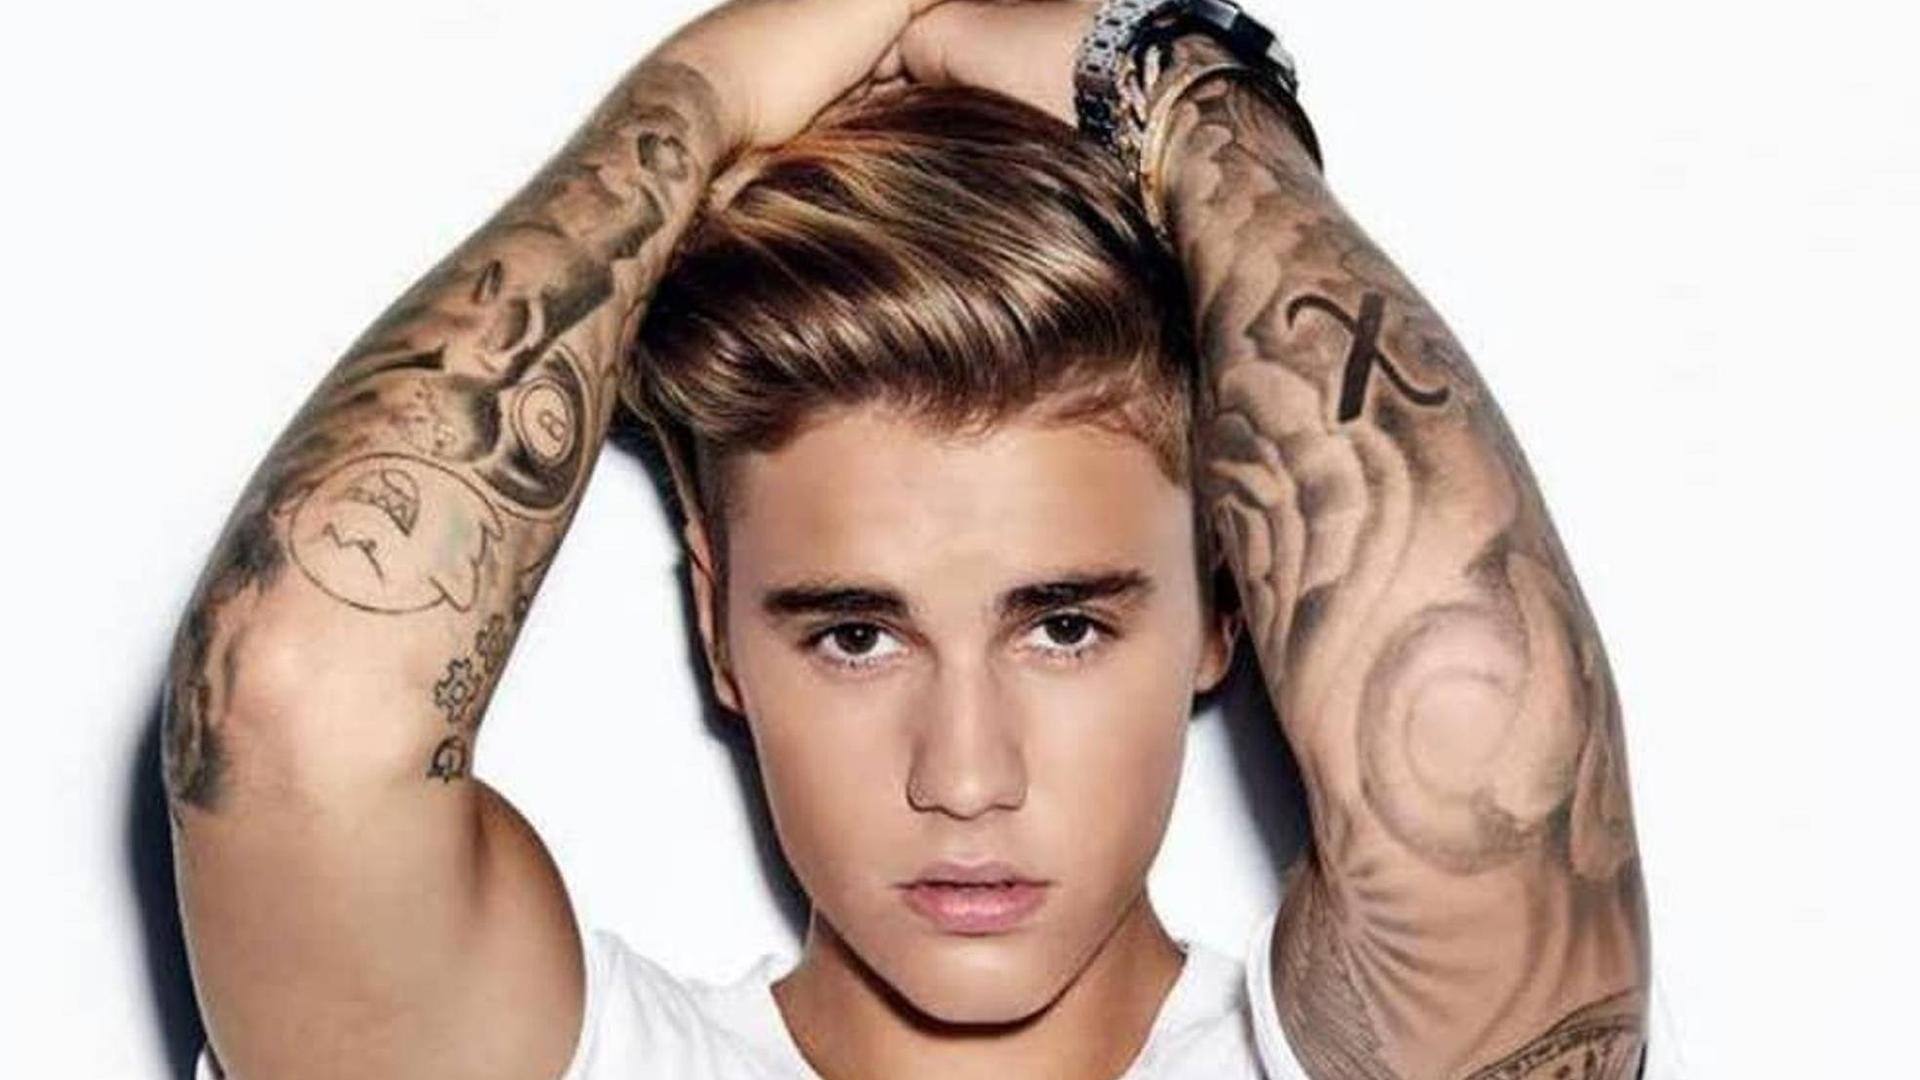 Happy birthday Justin Bieber: 5 record-breaking moments of the popstar